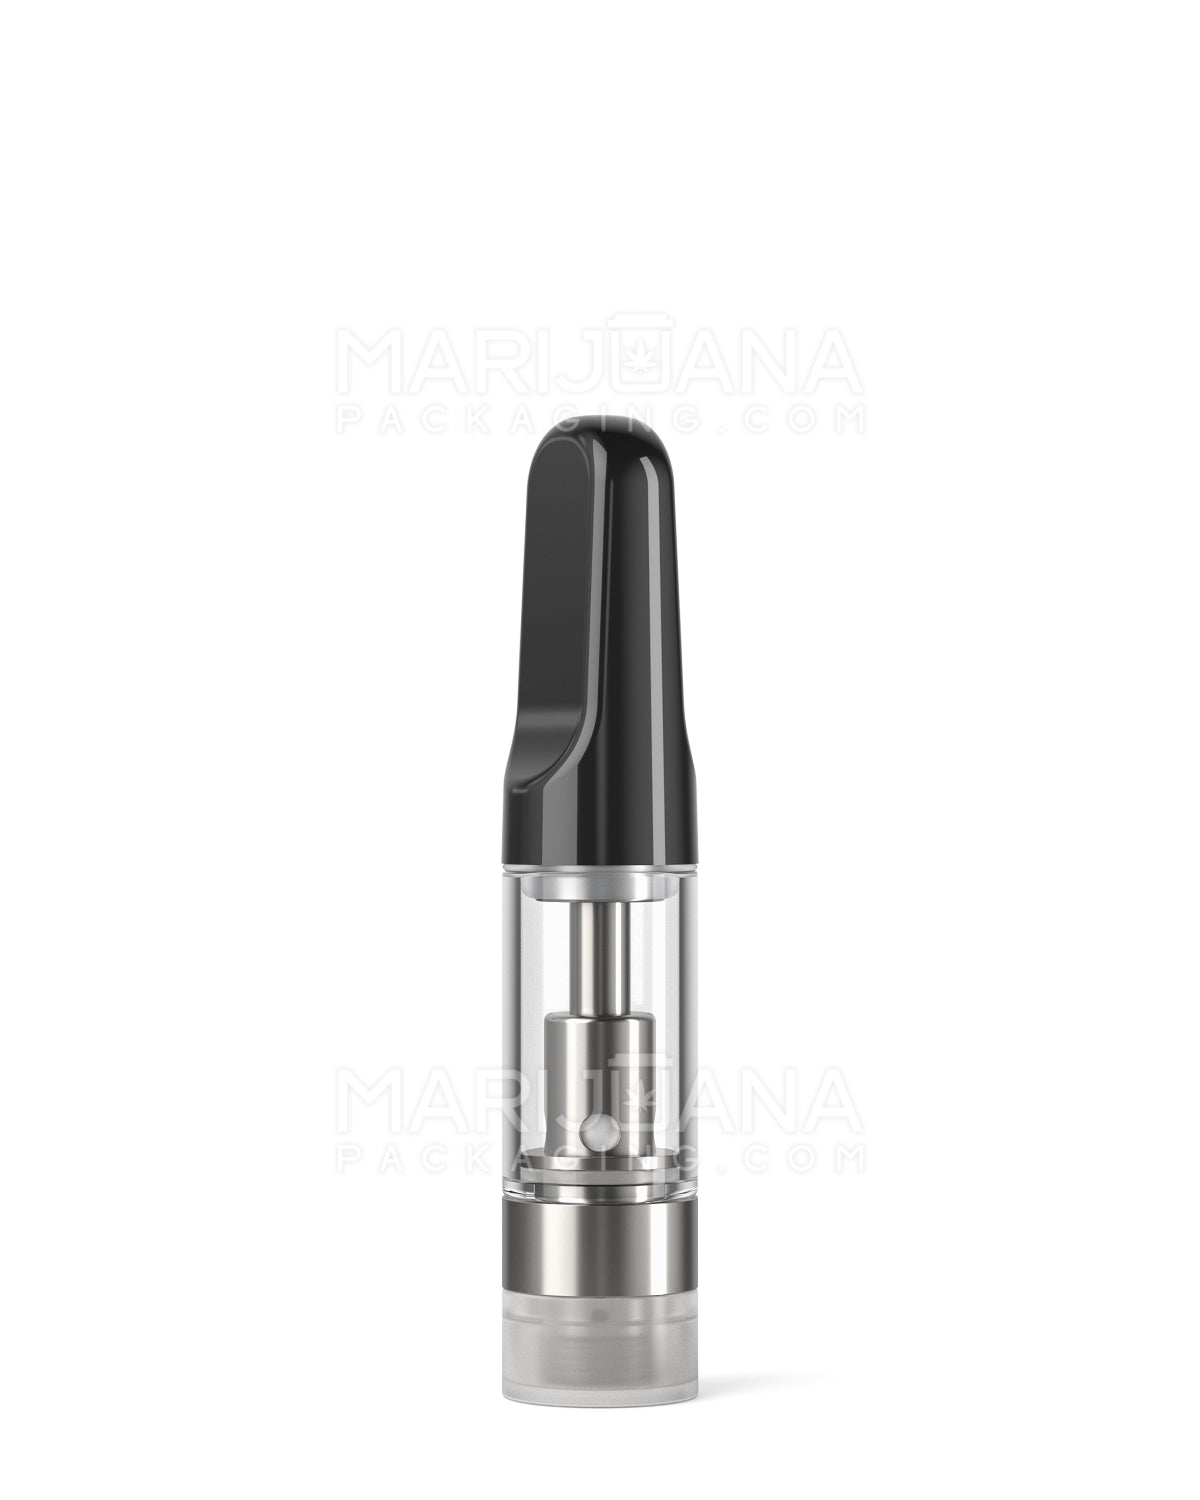 CCELL | Liquid6 Reactor Glass Vape Cartridge with Black Ceramic Mouthpiece | 0.5mL - Screw On - 100 Count - 3